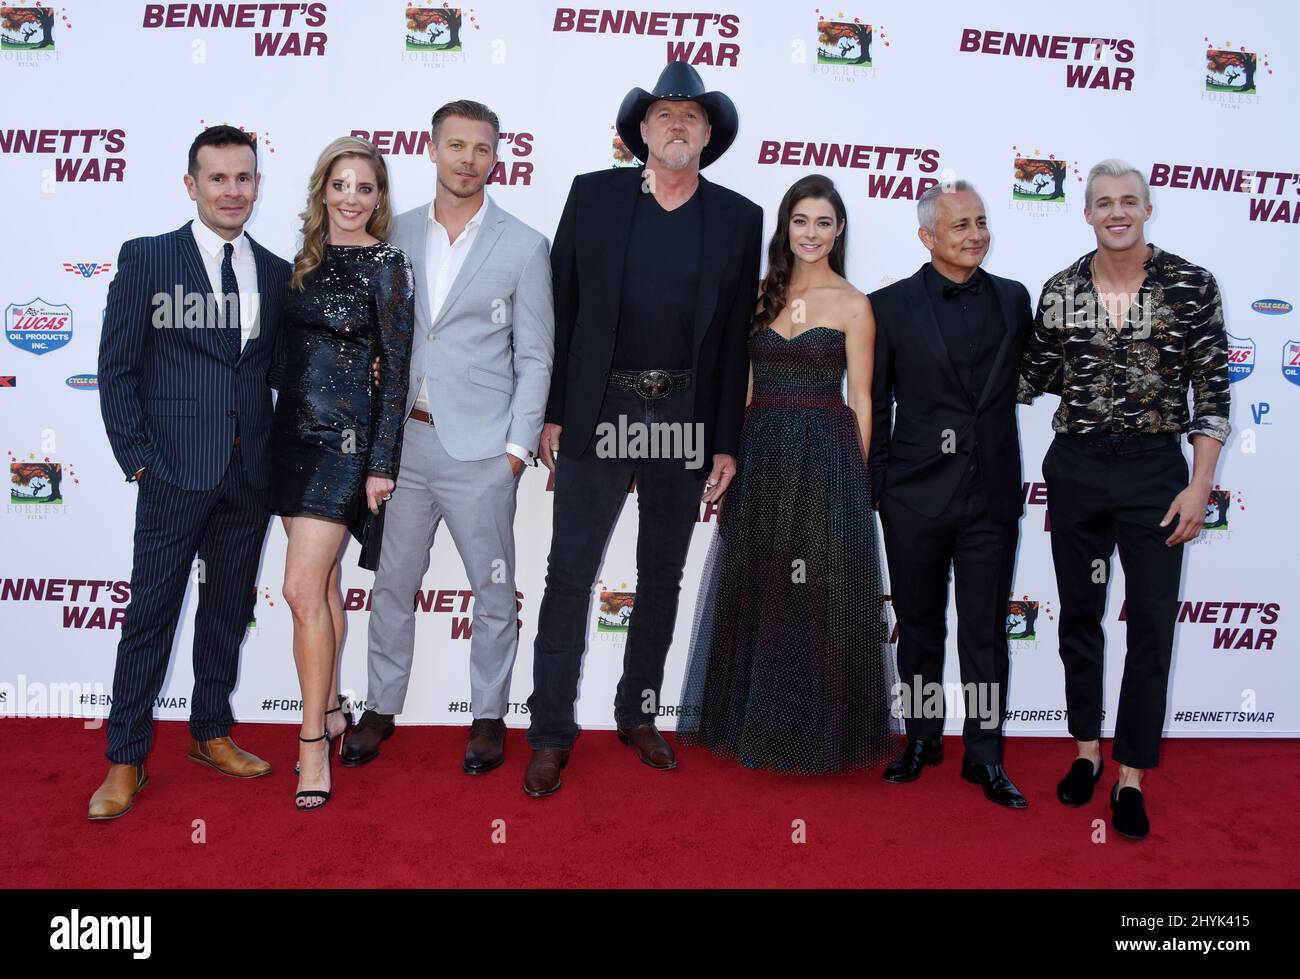 Alex Ranarivelo, Christina Moore, Michael Roark, Trace Adkins, Allison Paige and Ali Afshar at the premiere of 'Bennett's War' held at the Steven J. Ross Theater at Warner Bros. Studios Stock Photo